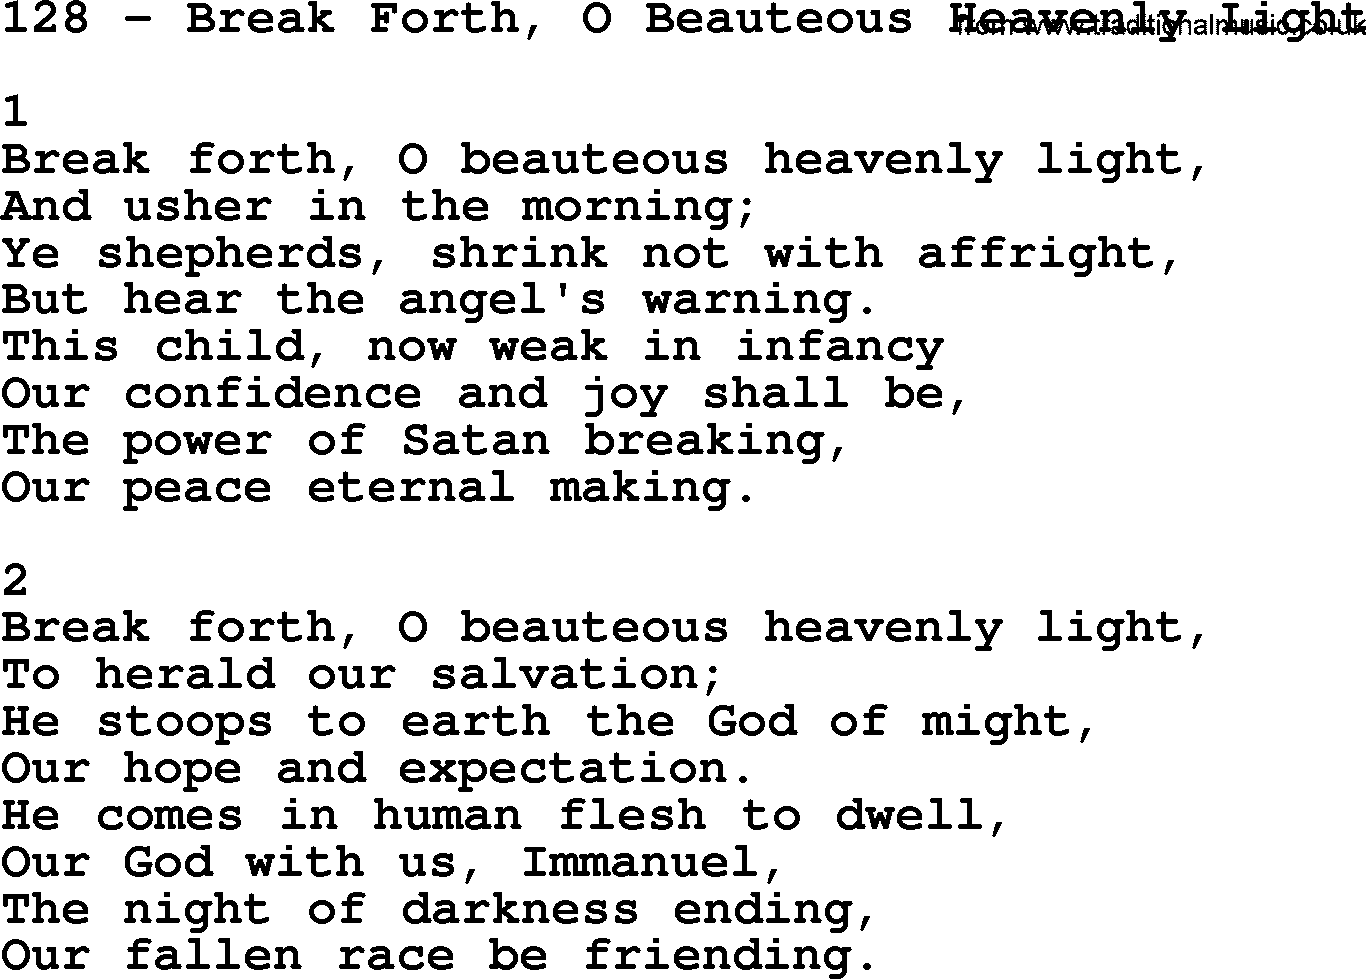 Complete Adventis Hymnal, title: 128-Break Forth, O Beauteous Heavenly Light, with lyrics, midi, mp3, powerpoints(PPT) and PDF,